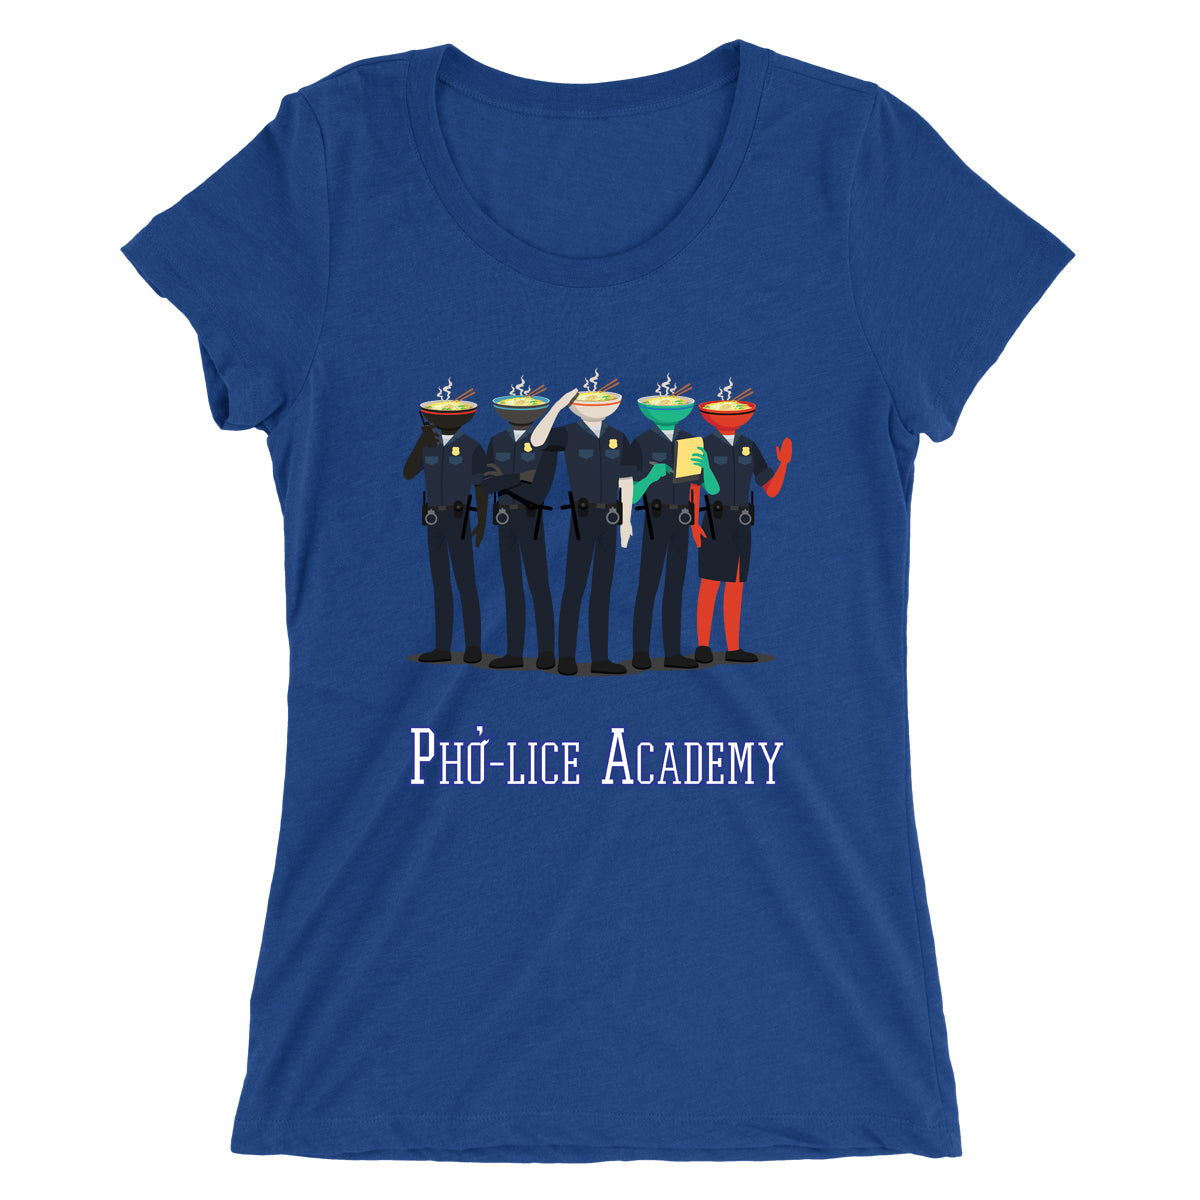 Movie The Food - Pho-lice Academy Women's T-Shirt - Royal Blue